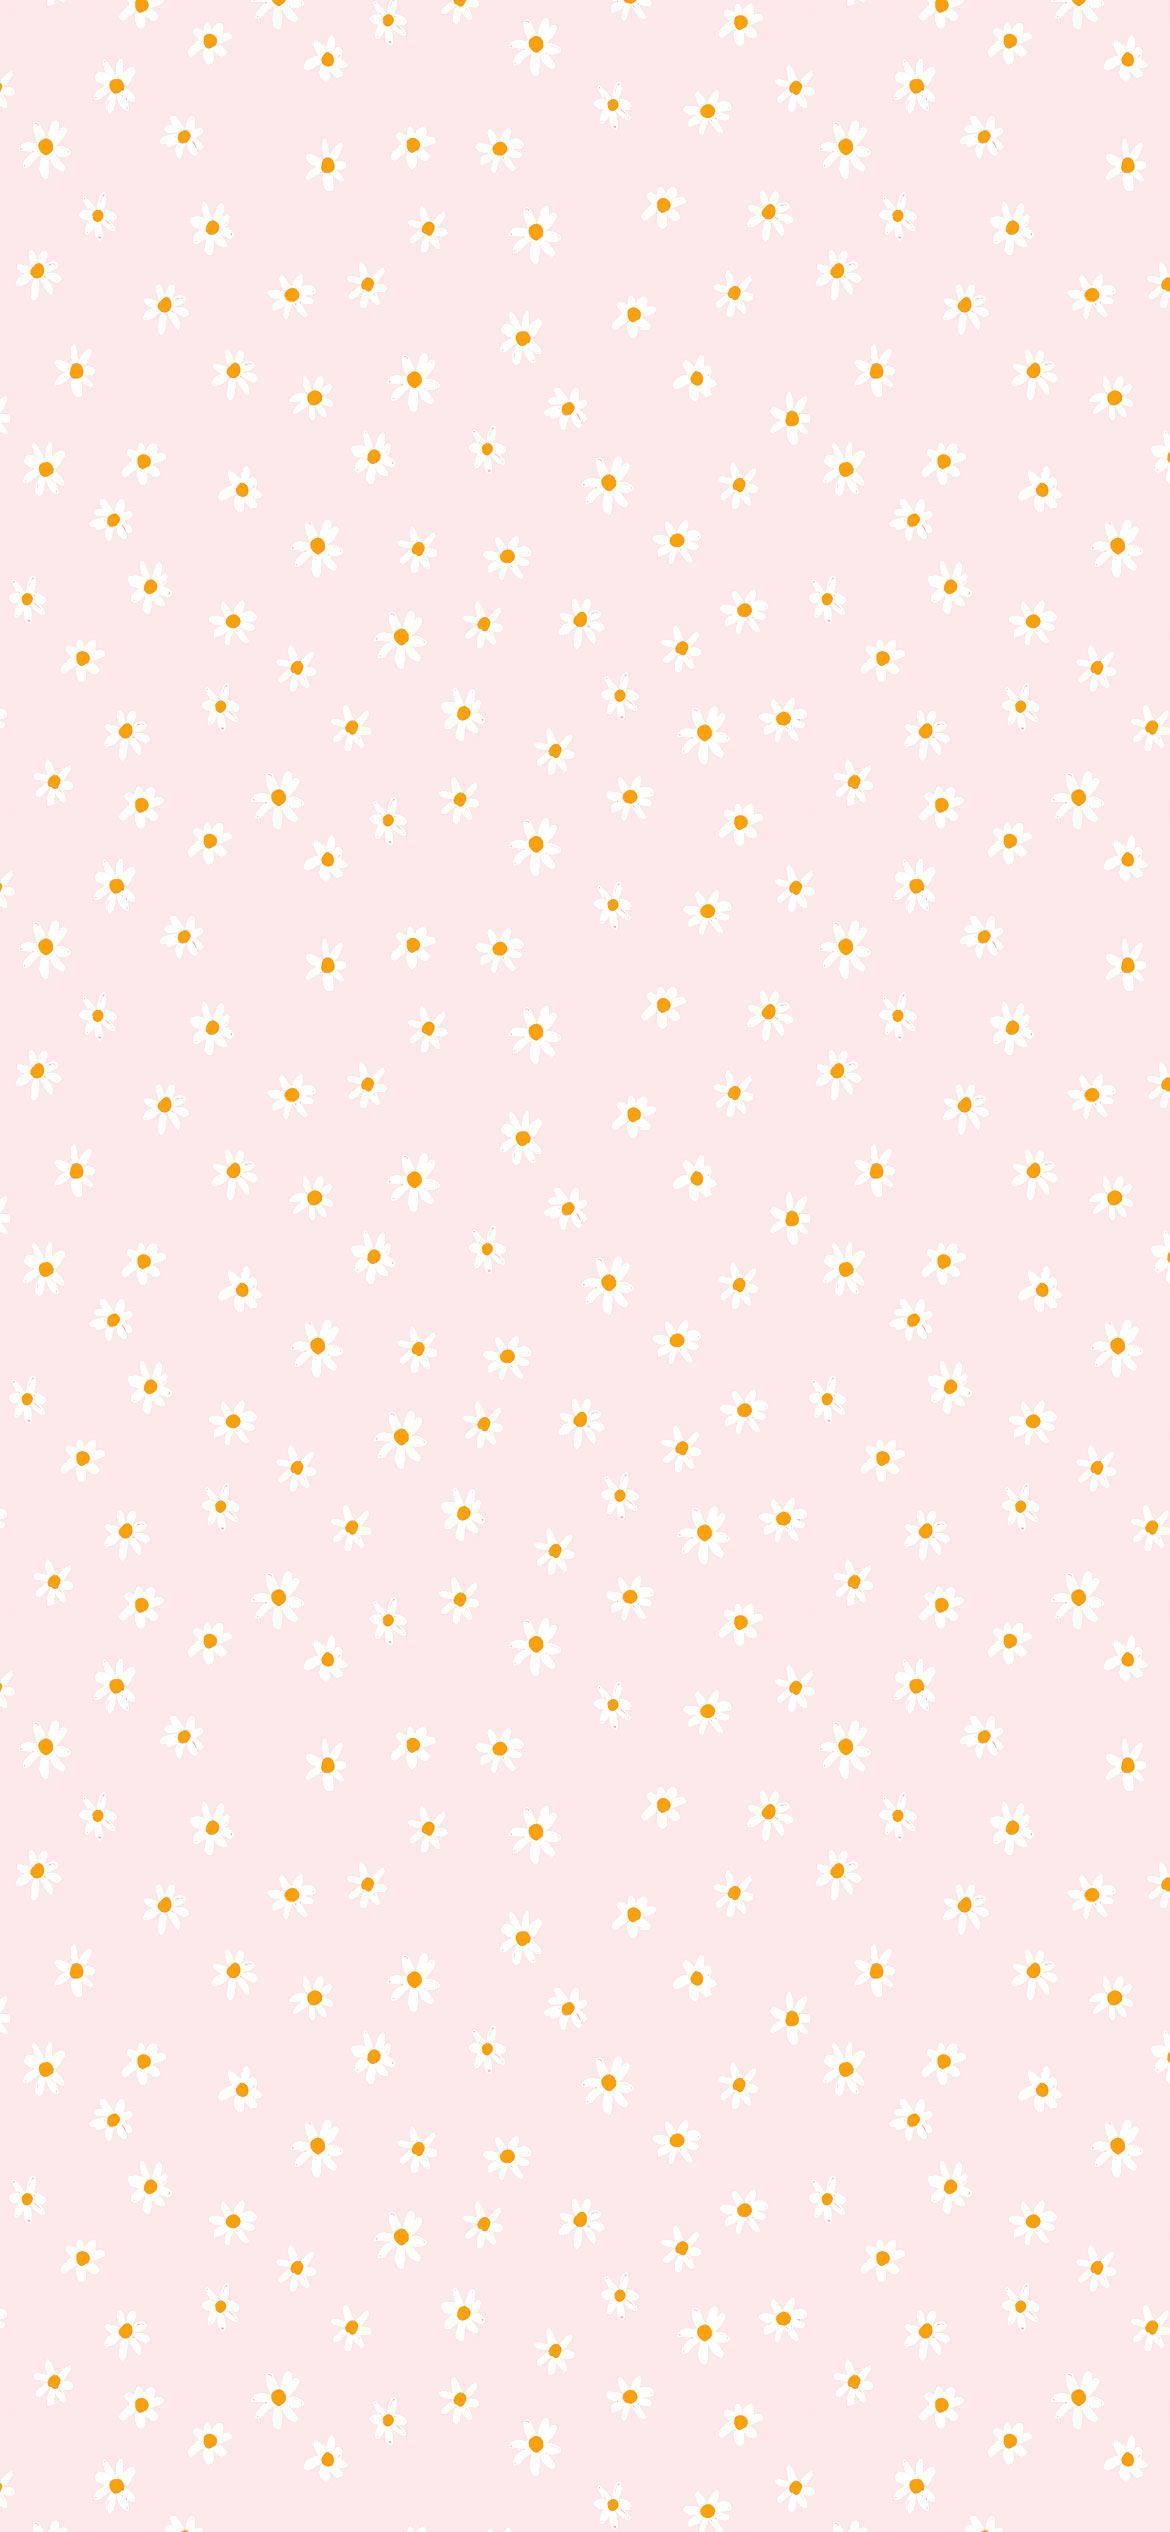 Pink Aesthetic Picture : Daisy Wallpaper for Phone Wallpaper